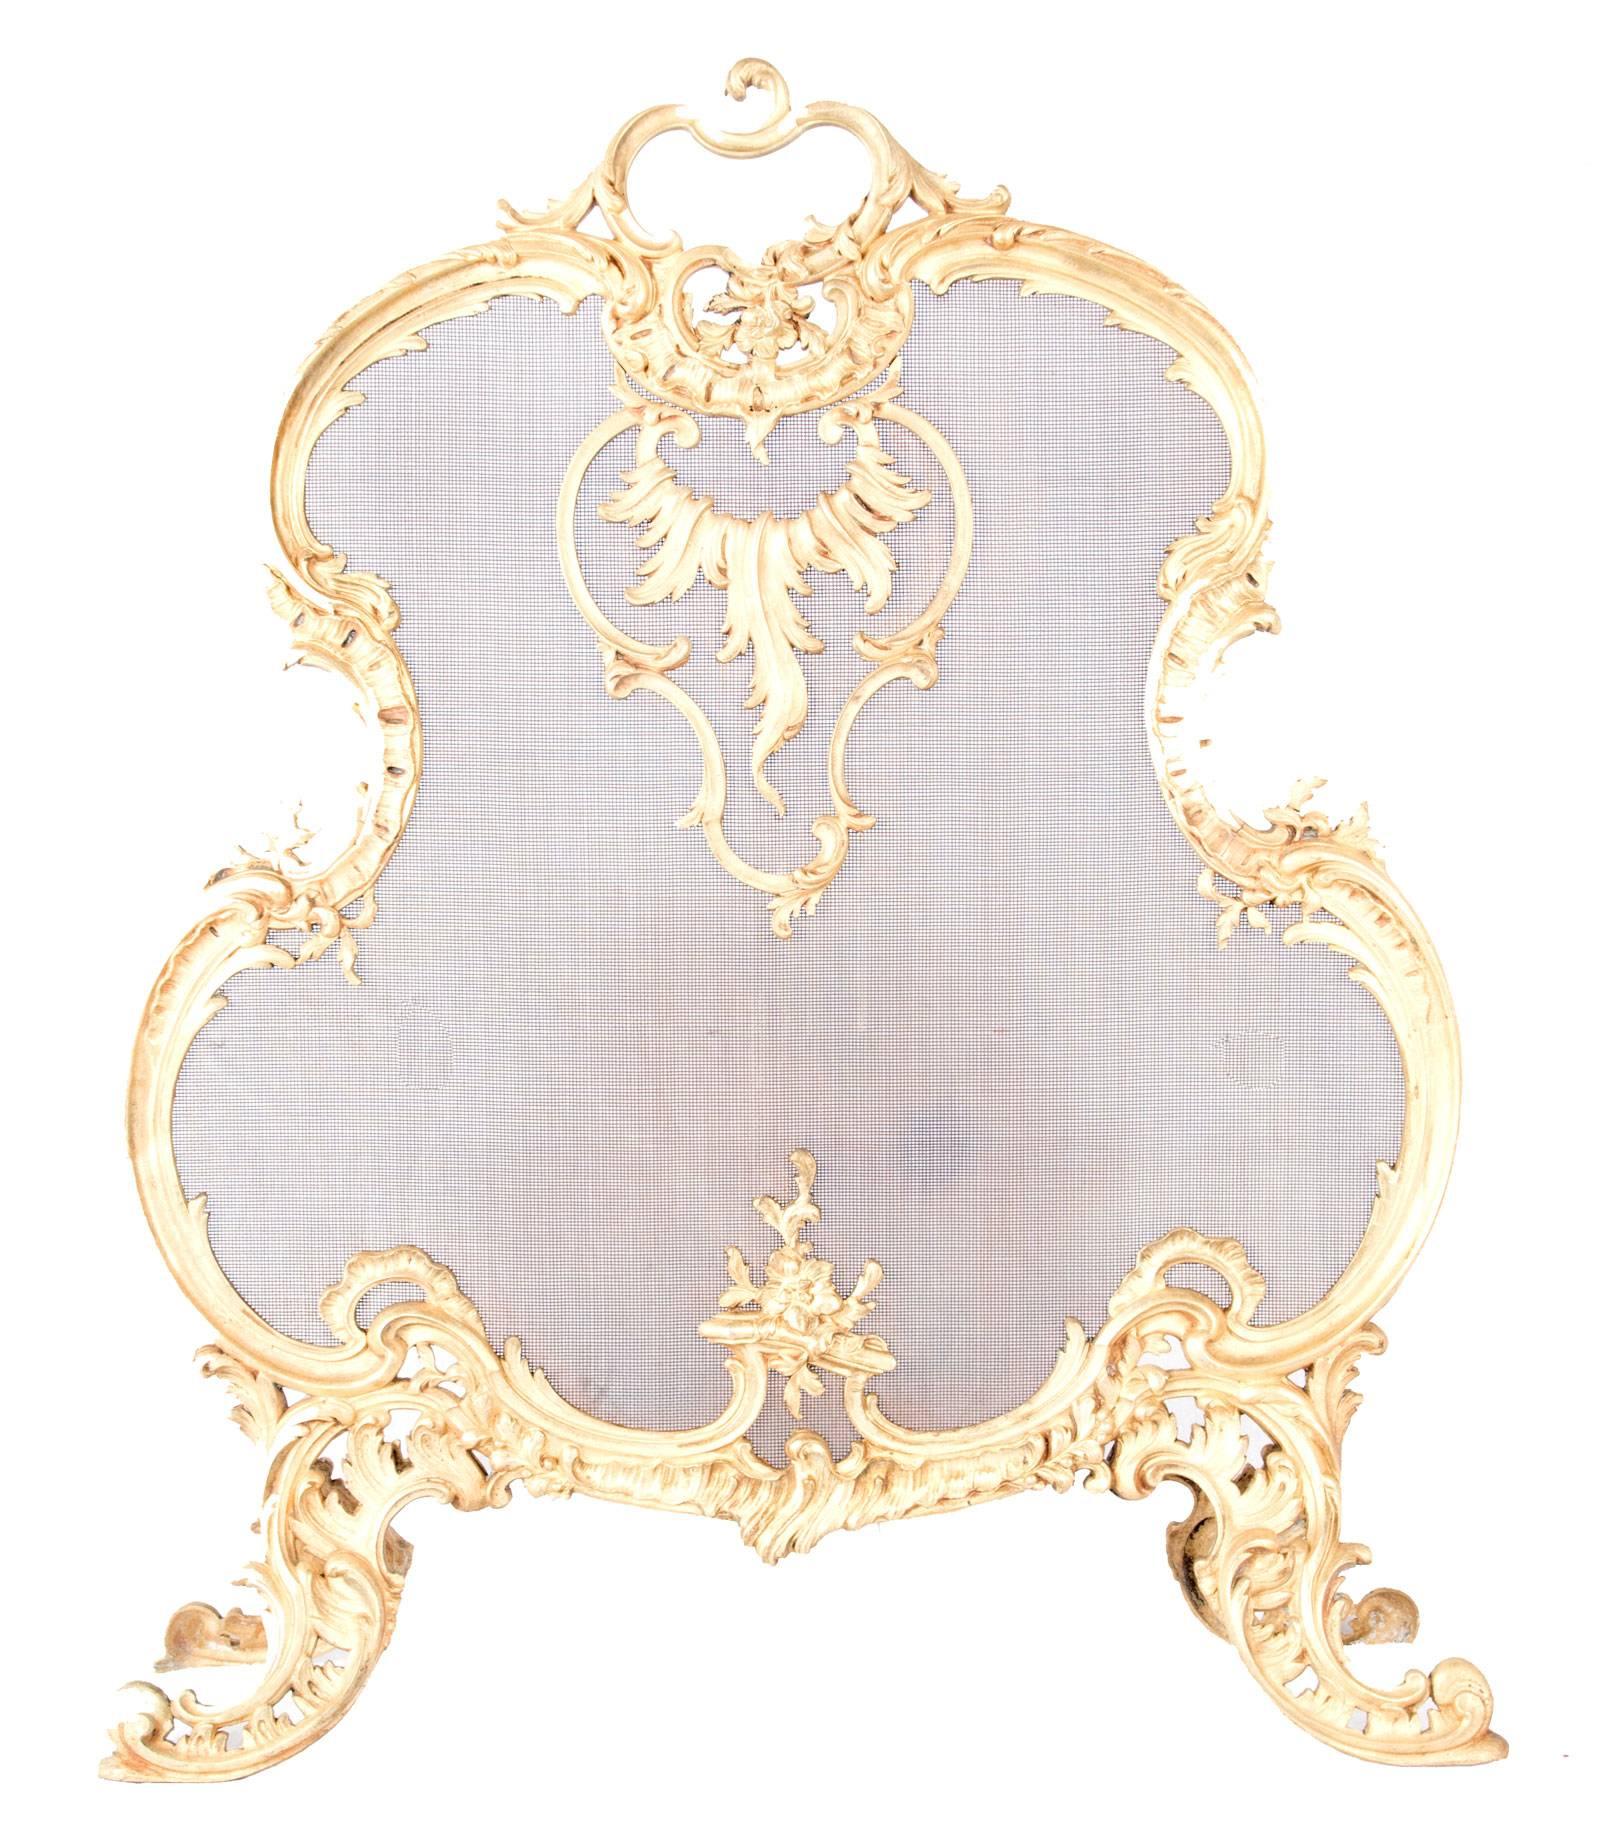 A French gilt-brass Rococo-style fireplace screen, the frame with scrolling foliage and filigree designs and the screen with an acanthus leaf cartouche, raised on scrolled and pierced legs.